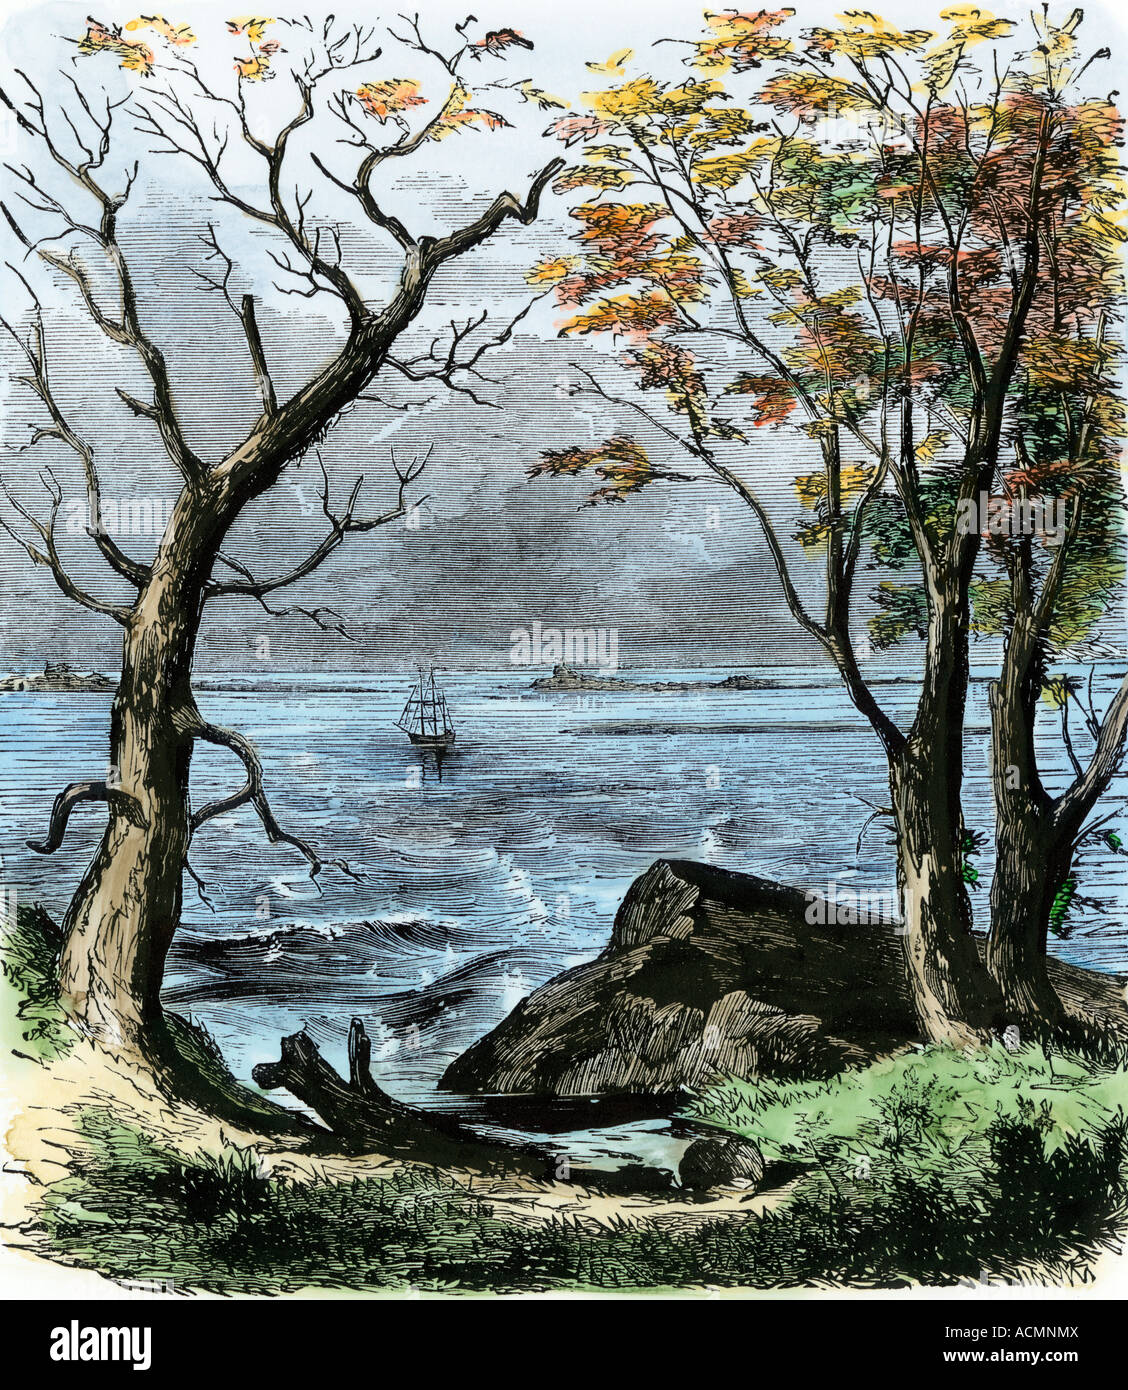 Plymouth Rock with the Mayflower at anchor in the bay. Hand-colored woodcut Stock Photo